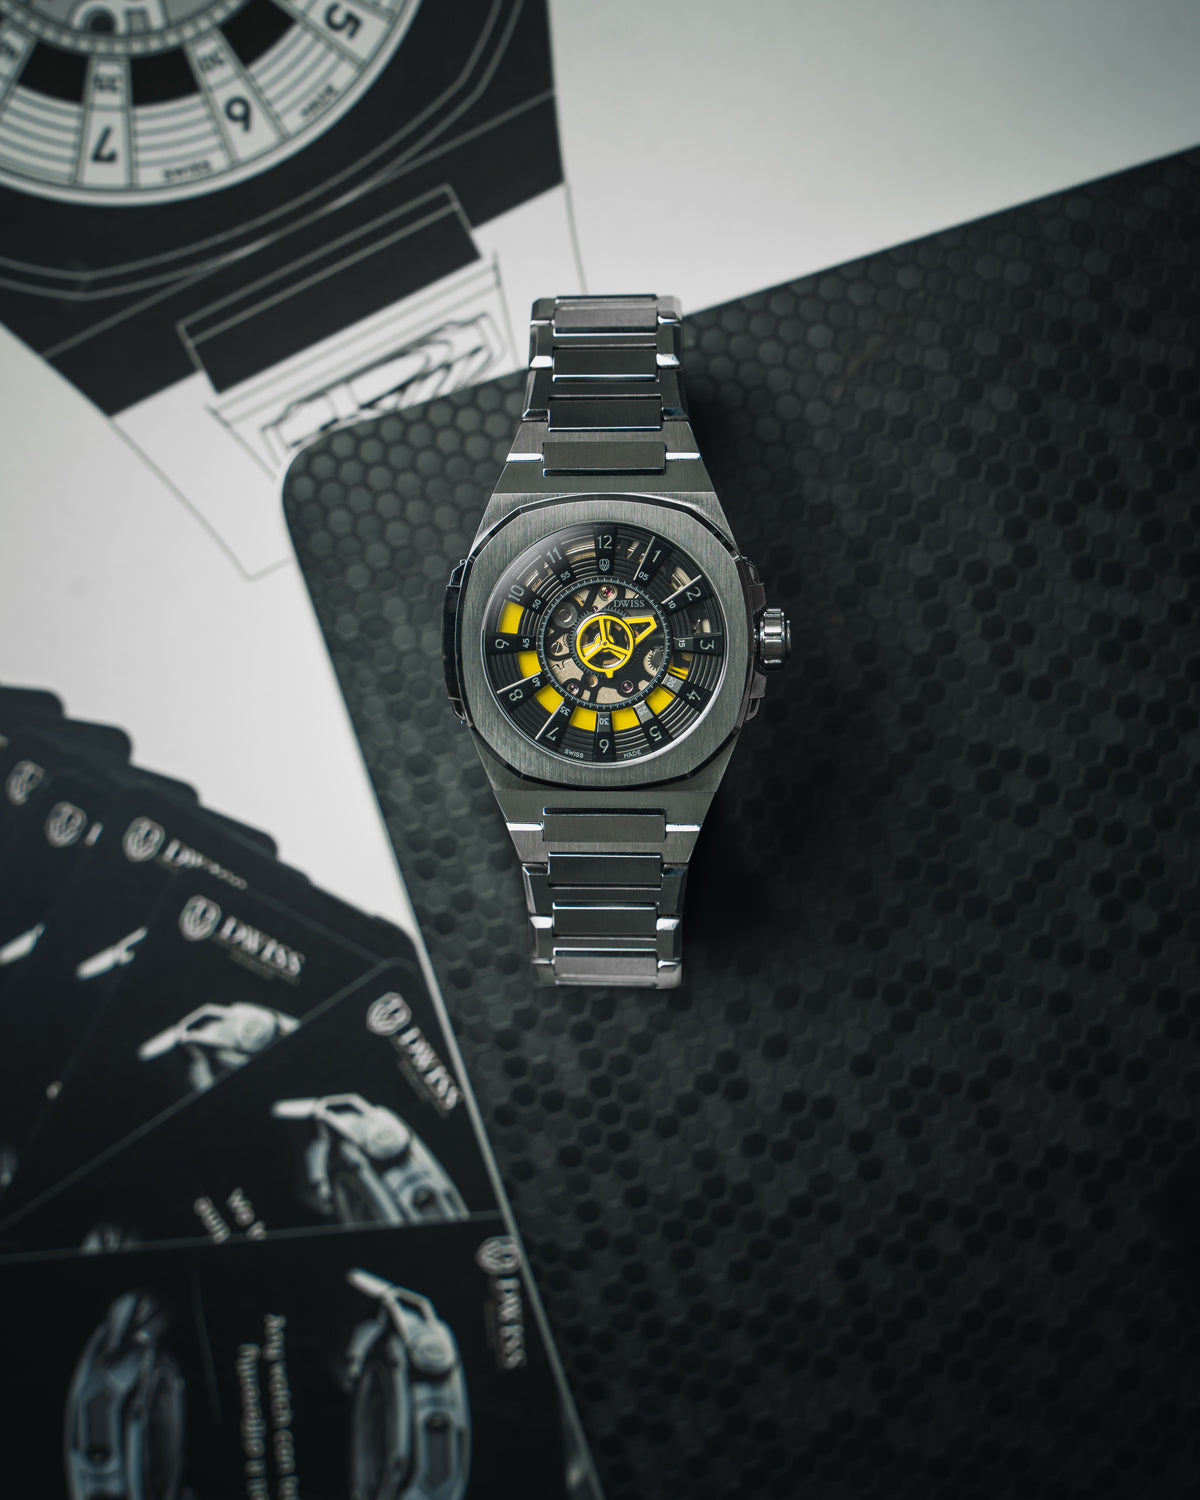 DWISS M3S yellow - metal bracelet, swiss made design awarded watch with DWISS signature mysterious hours time display and sapphire crystal